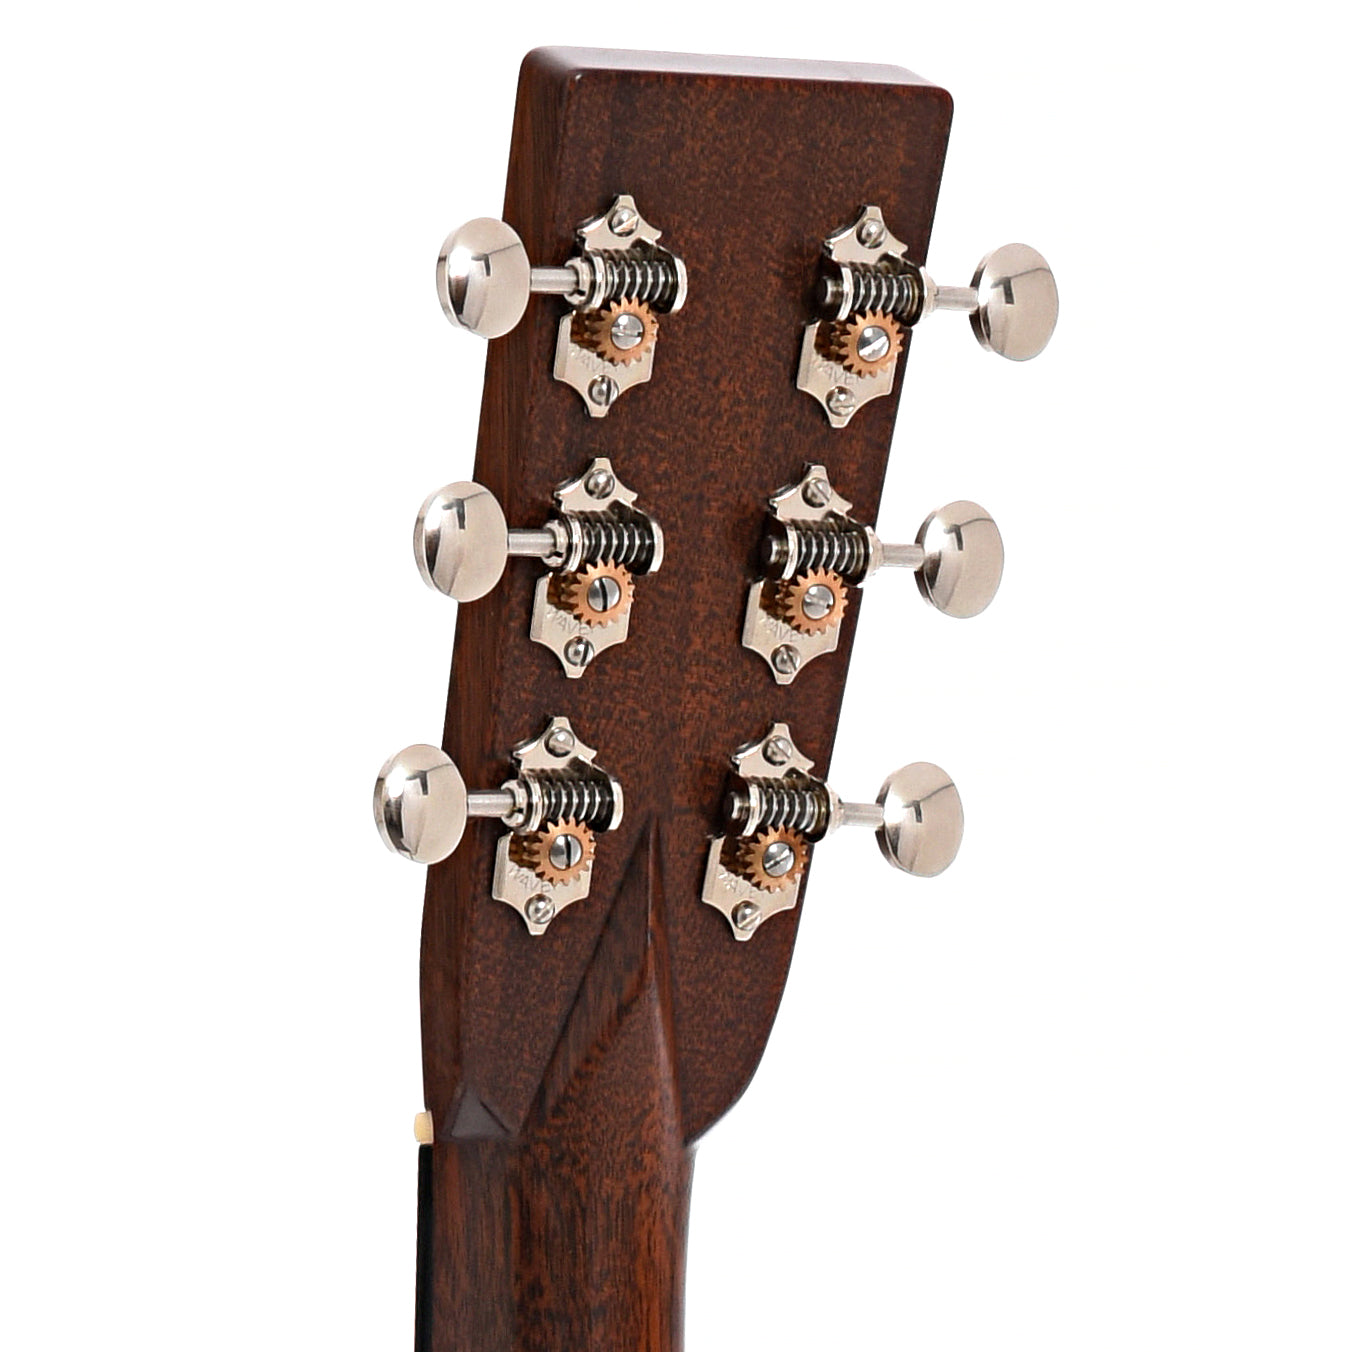 BAck headstock of Bourgeois D Fully Torrefied